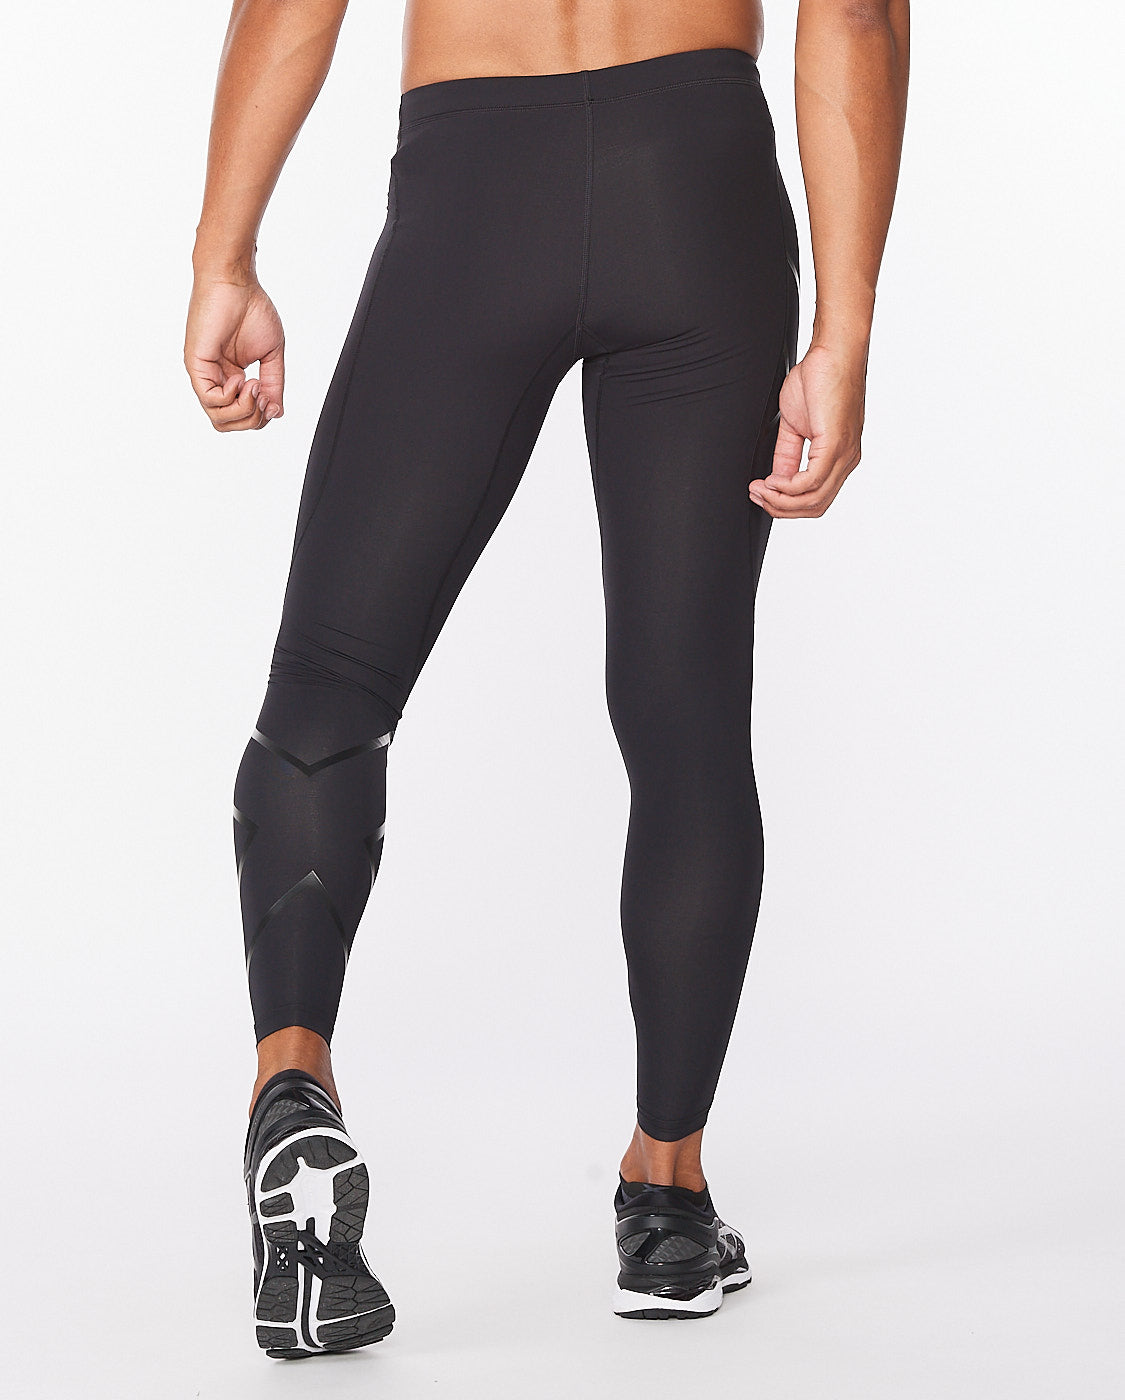 2XU Black Fitness High-Rise Compression Tights Women's Size Extra Small  L65260